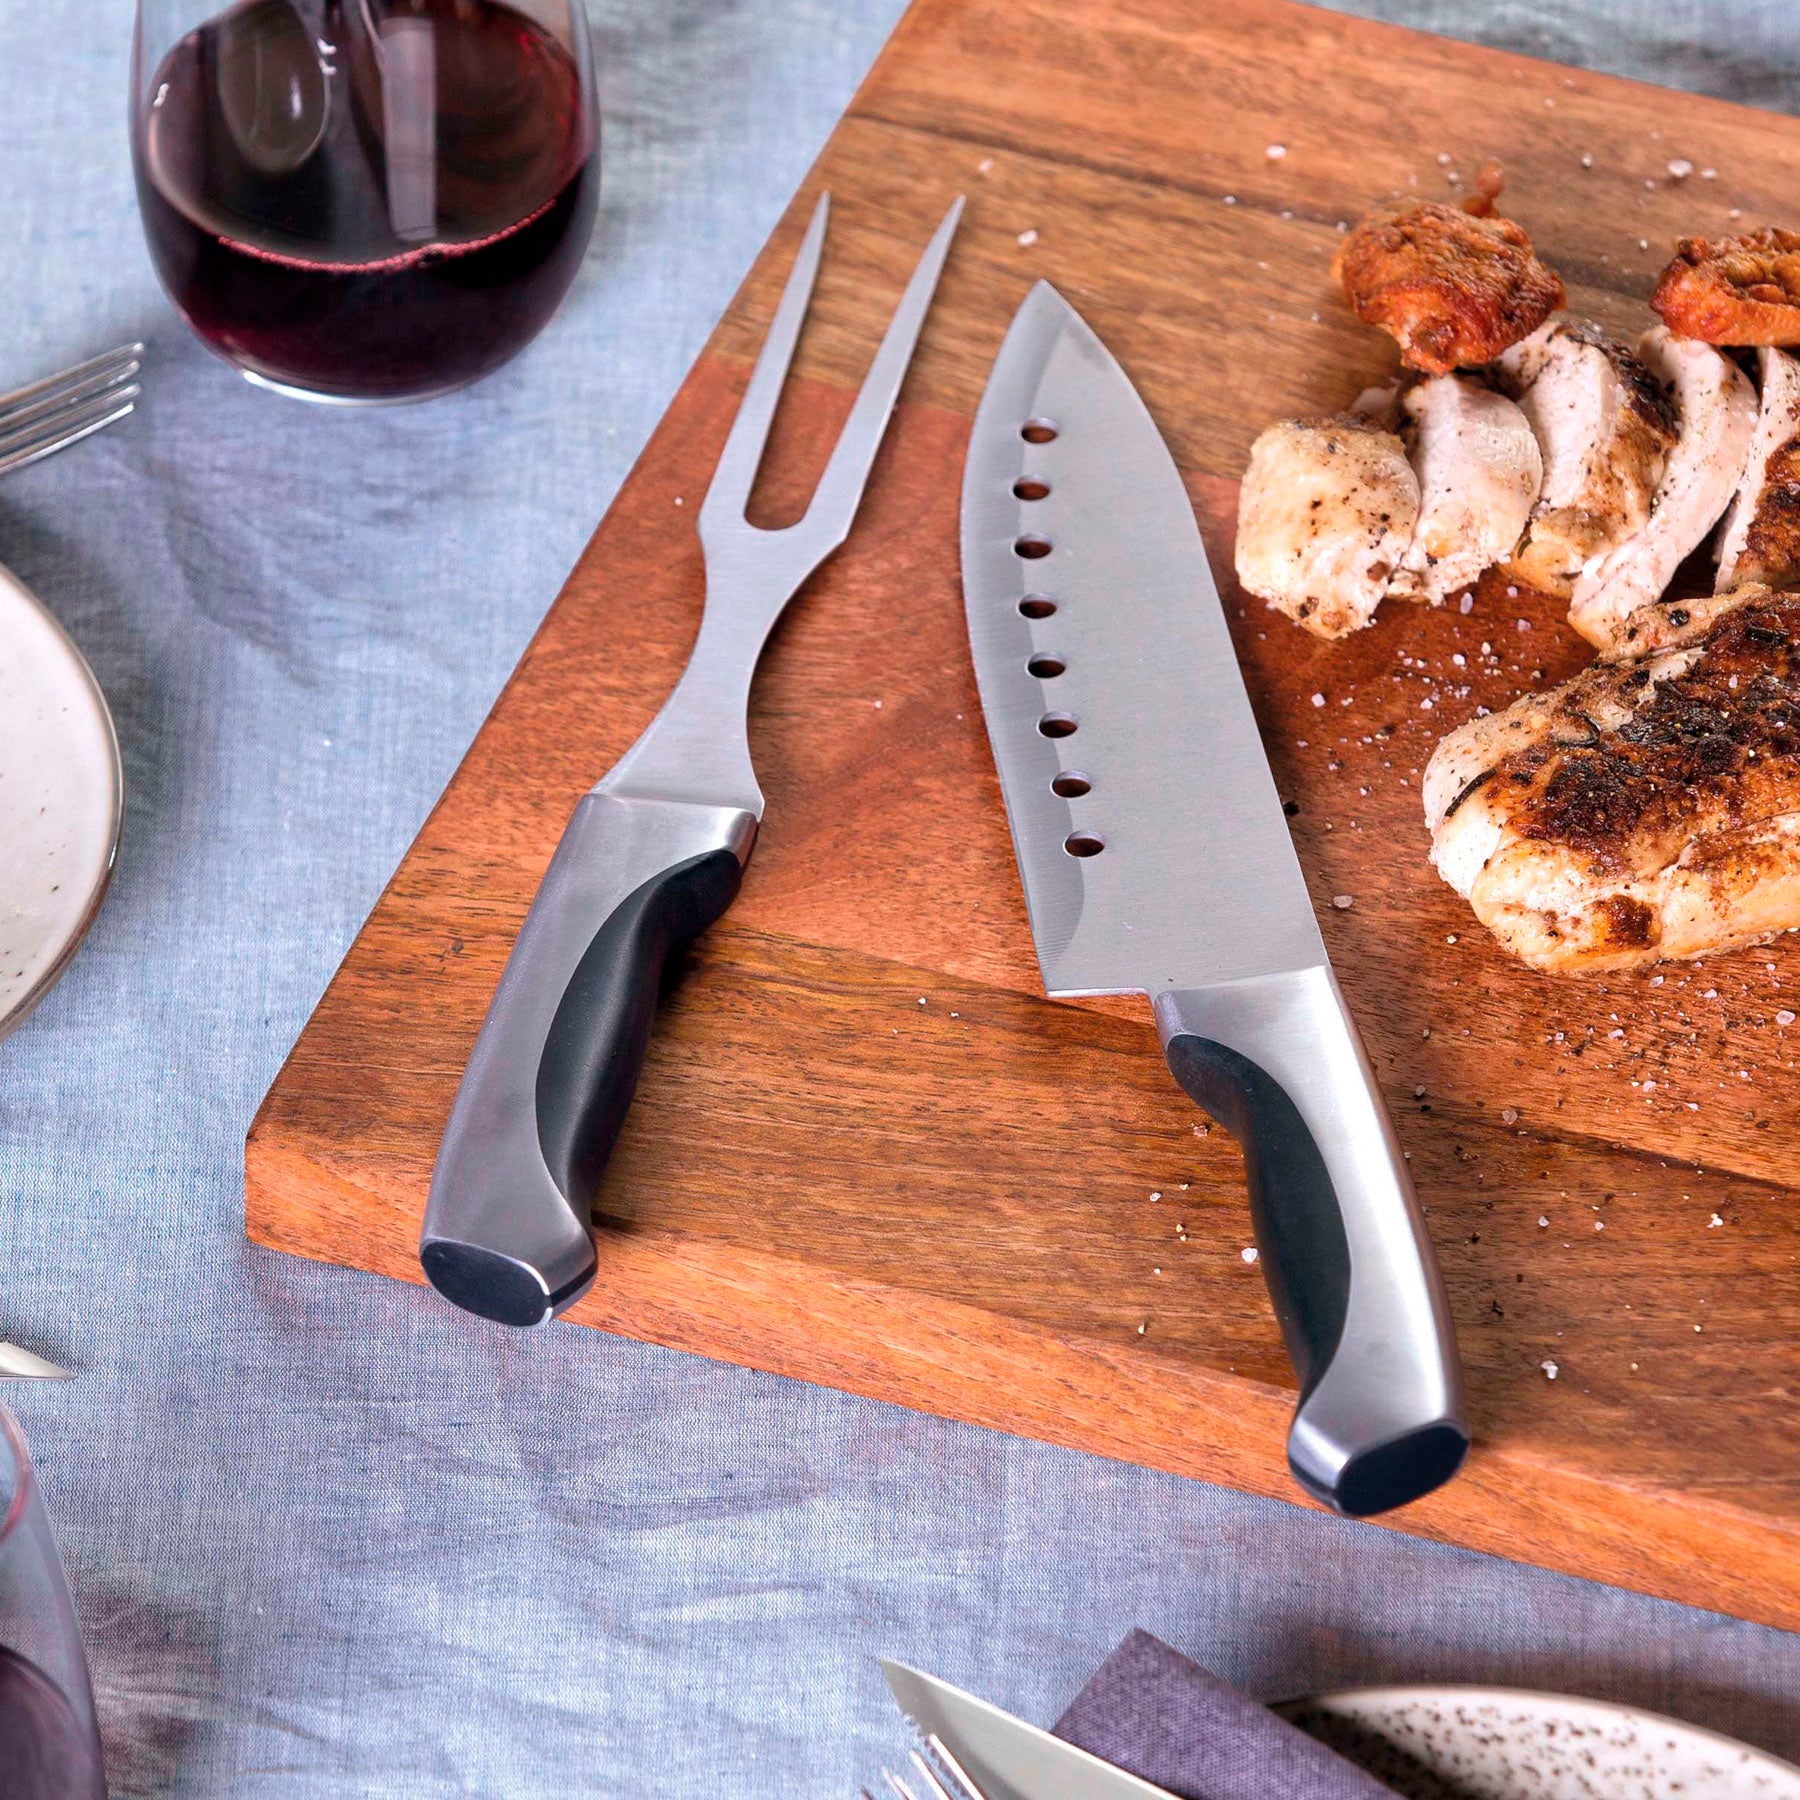 lifestyle photograph with a carving board and sliced meat next to the stainless steel carving set and a glass of red wine